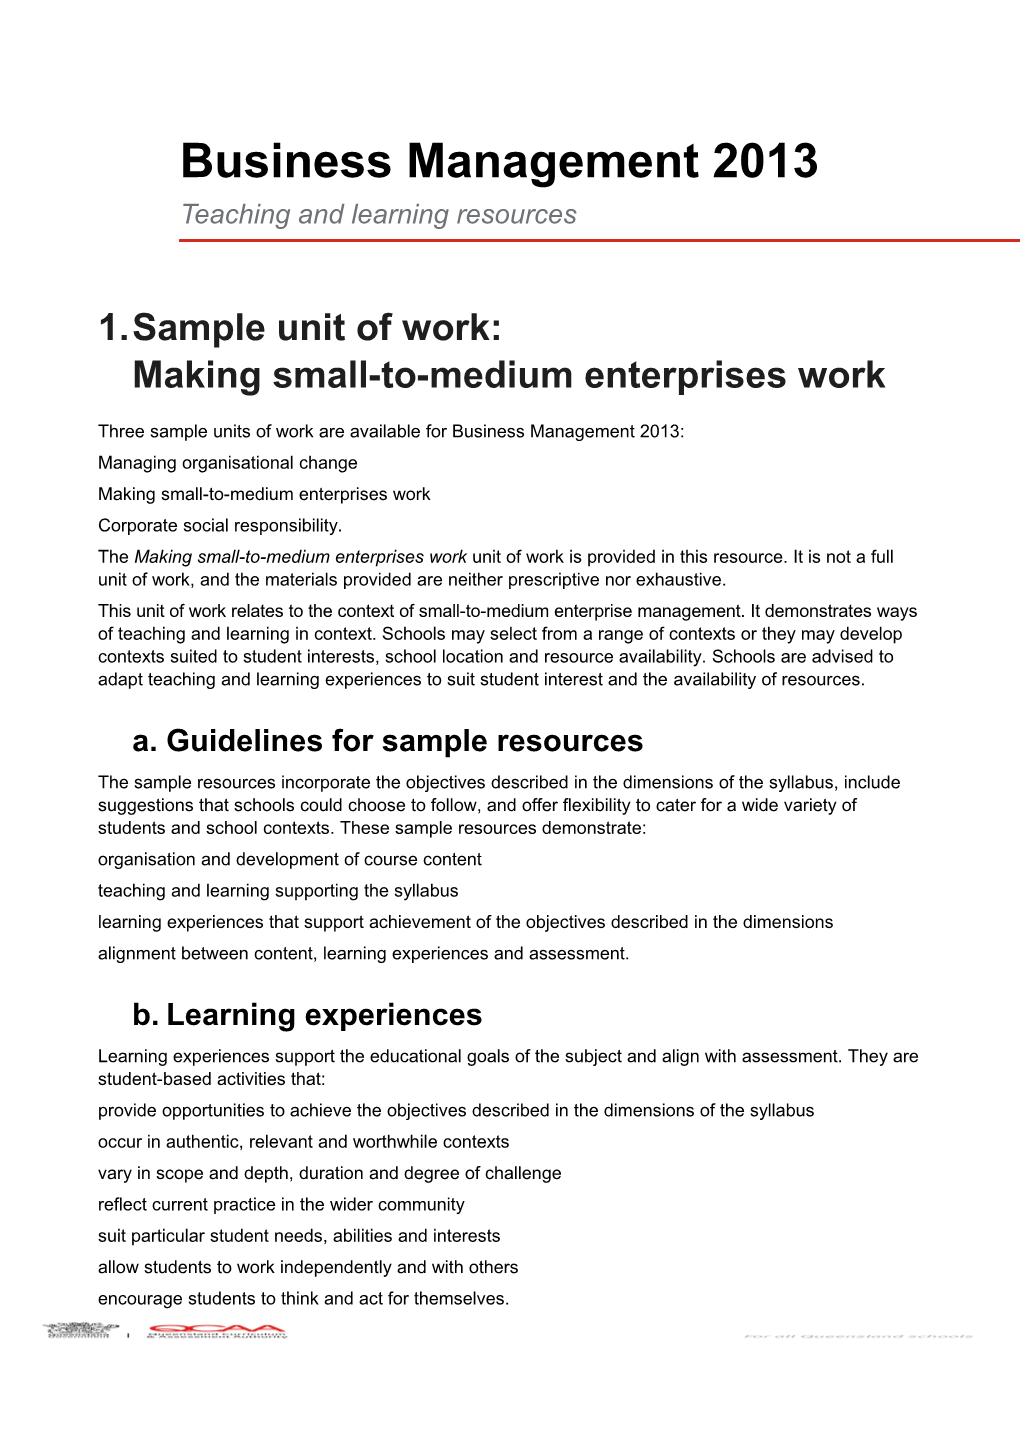 Business Management (2013) Teaching And Learning Resources: Sample Unit Of Work - Making Small-To-Medium Enterprises Work